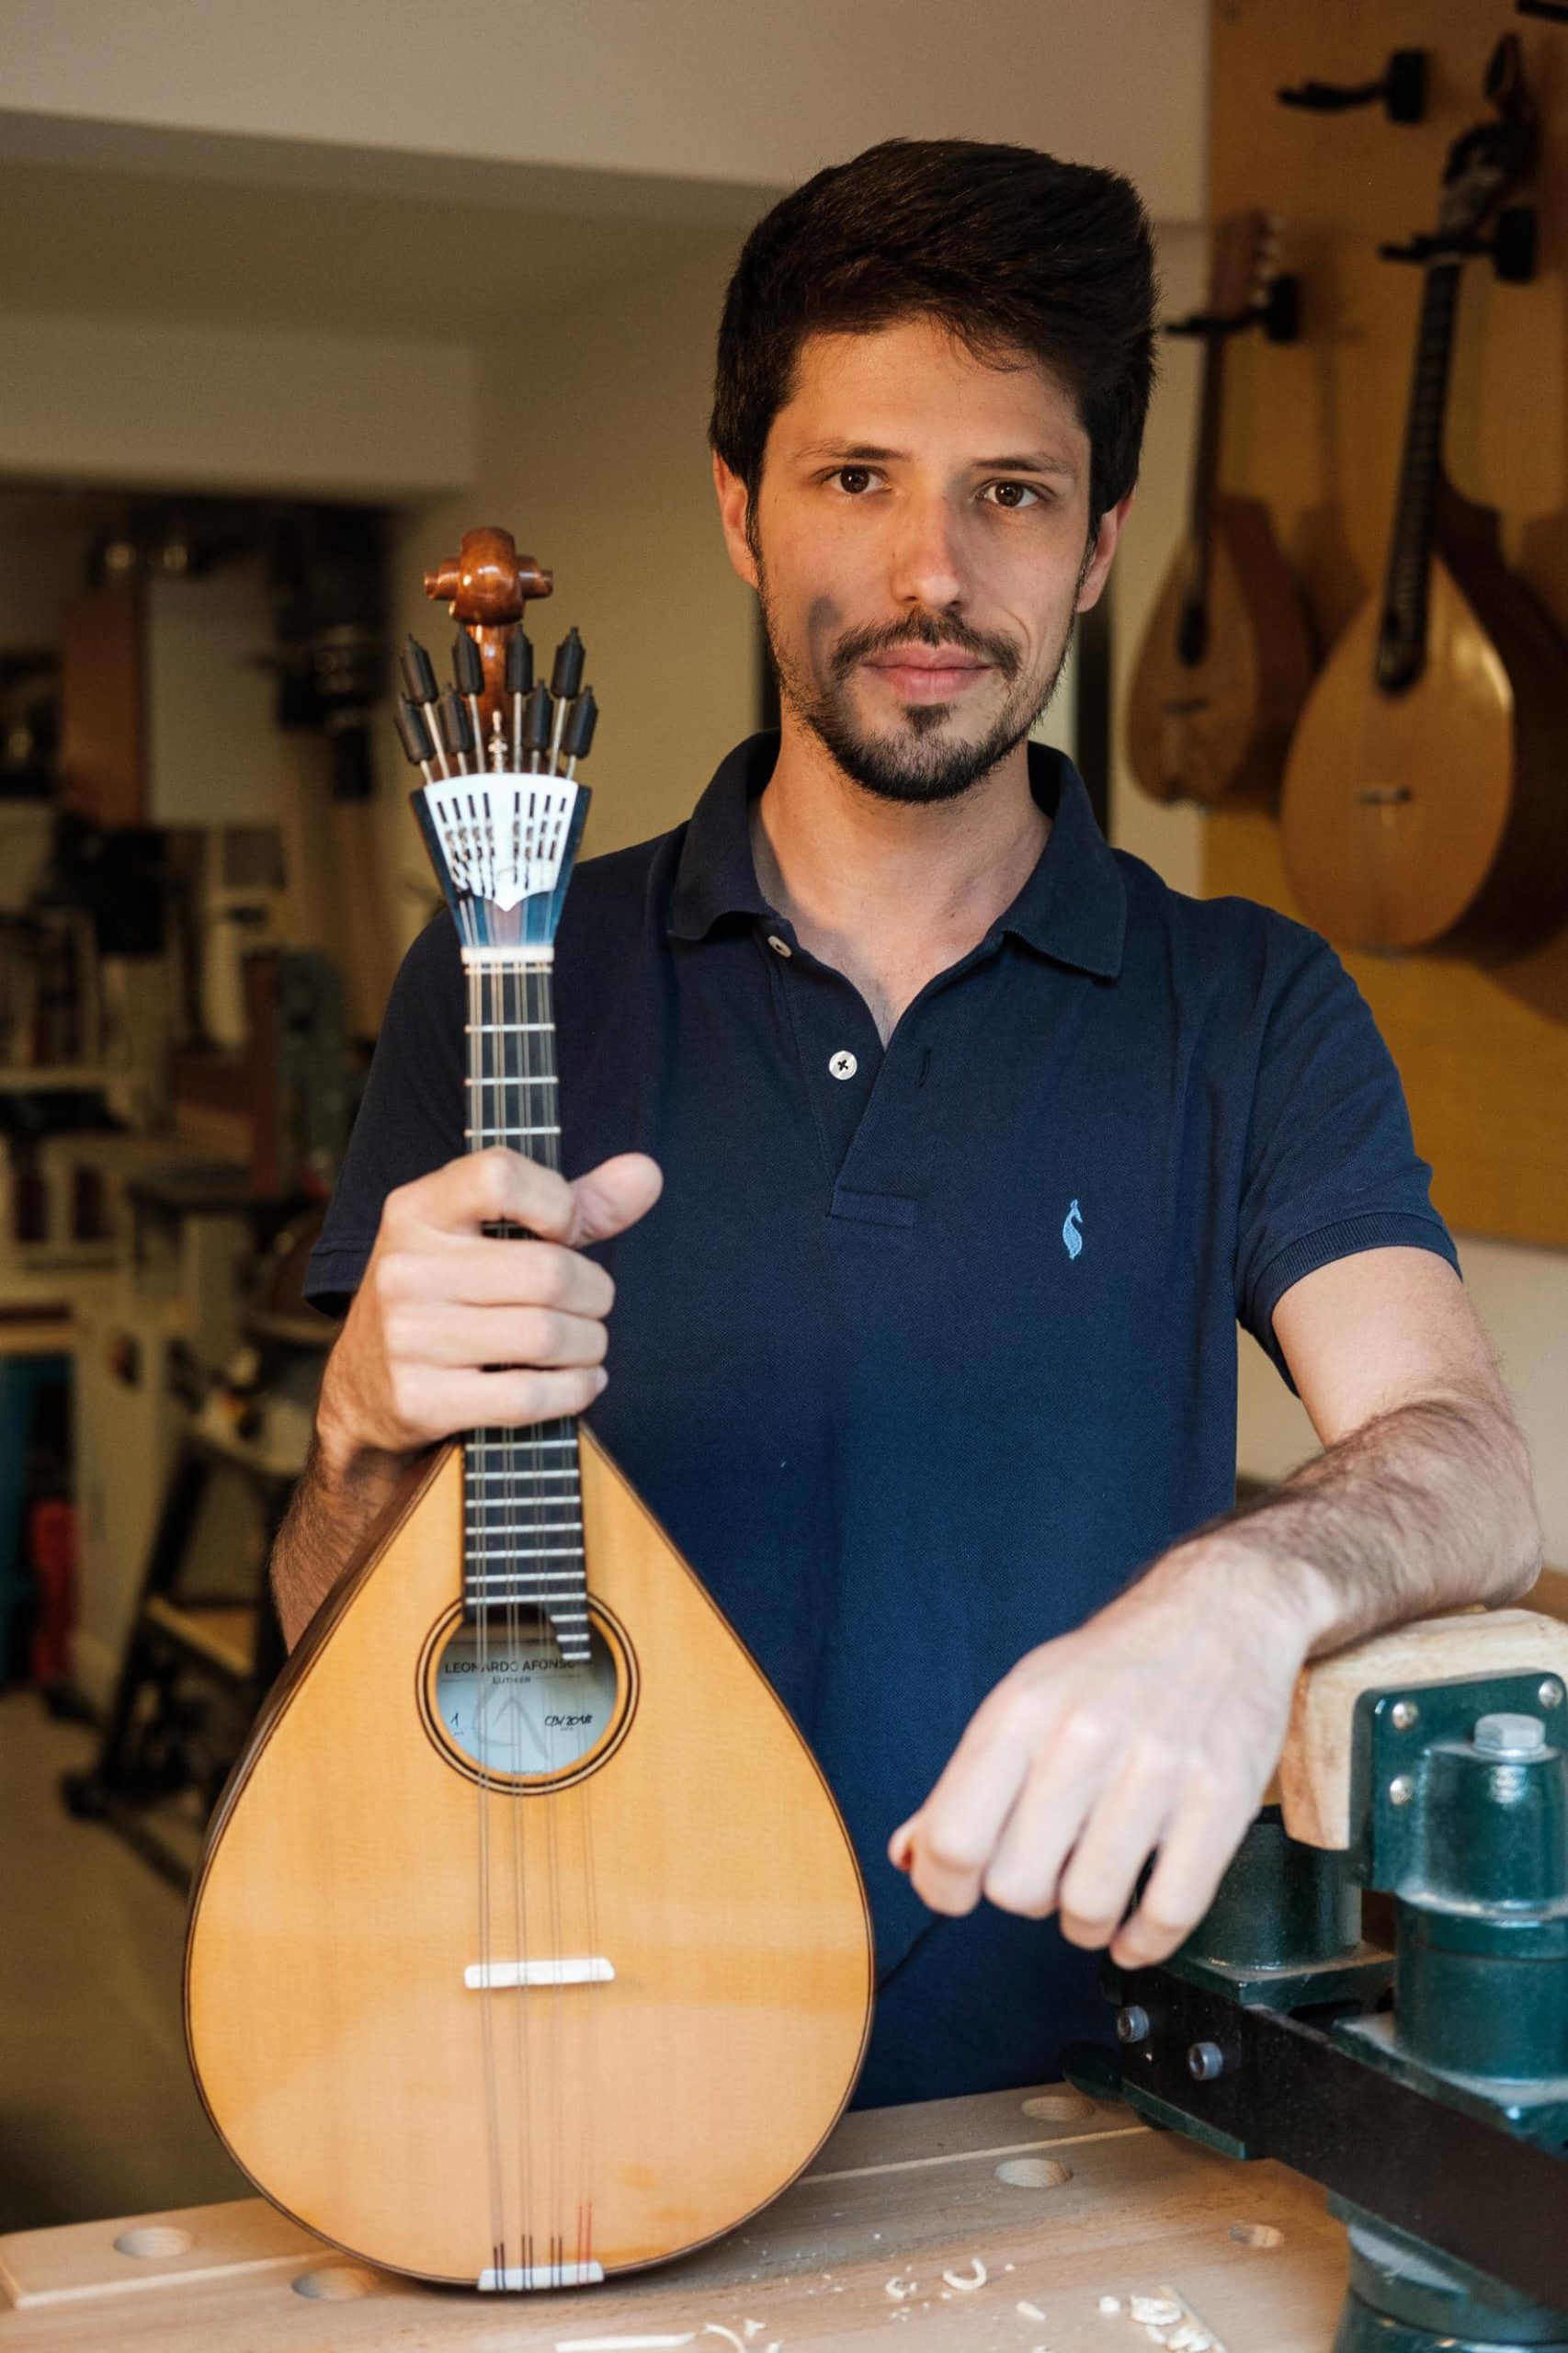 Portrait of the artist Leonardo Afonso posing with one of his guitars.